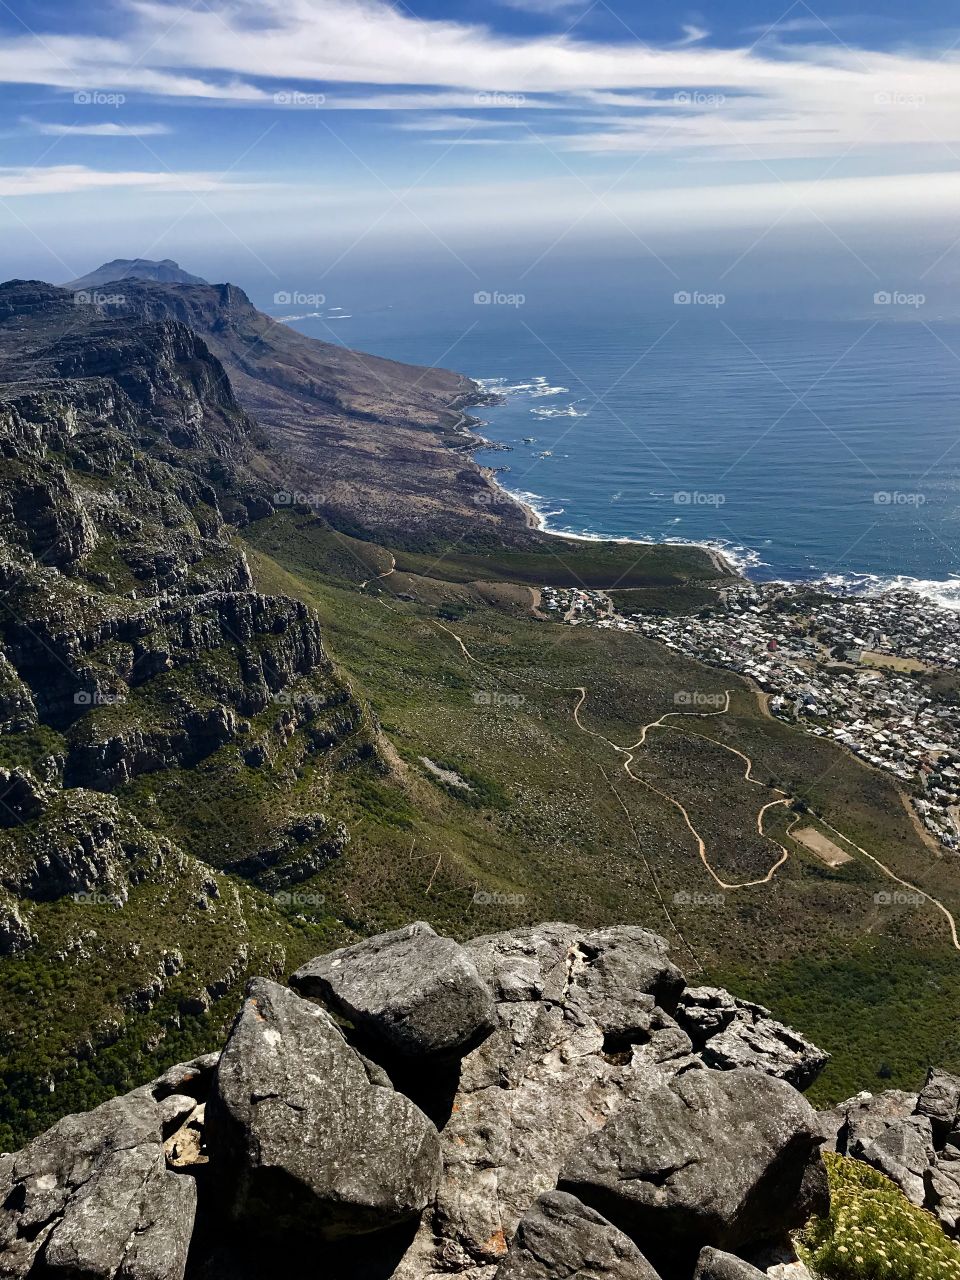 The View from Table Mountain South Aftica